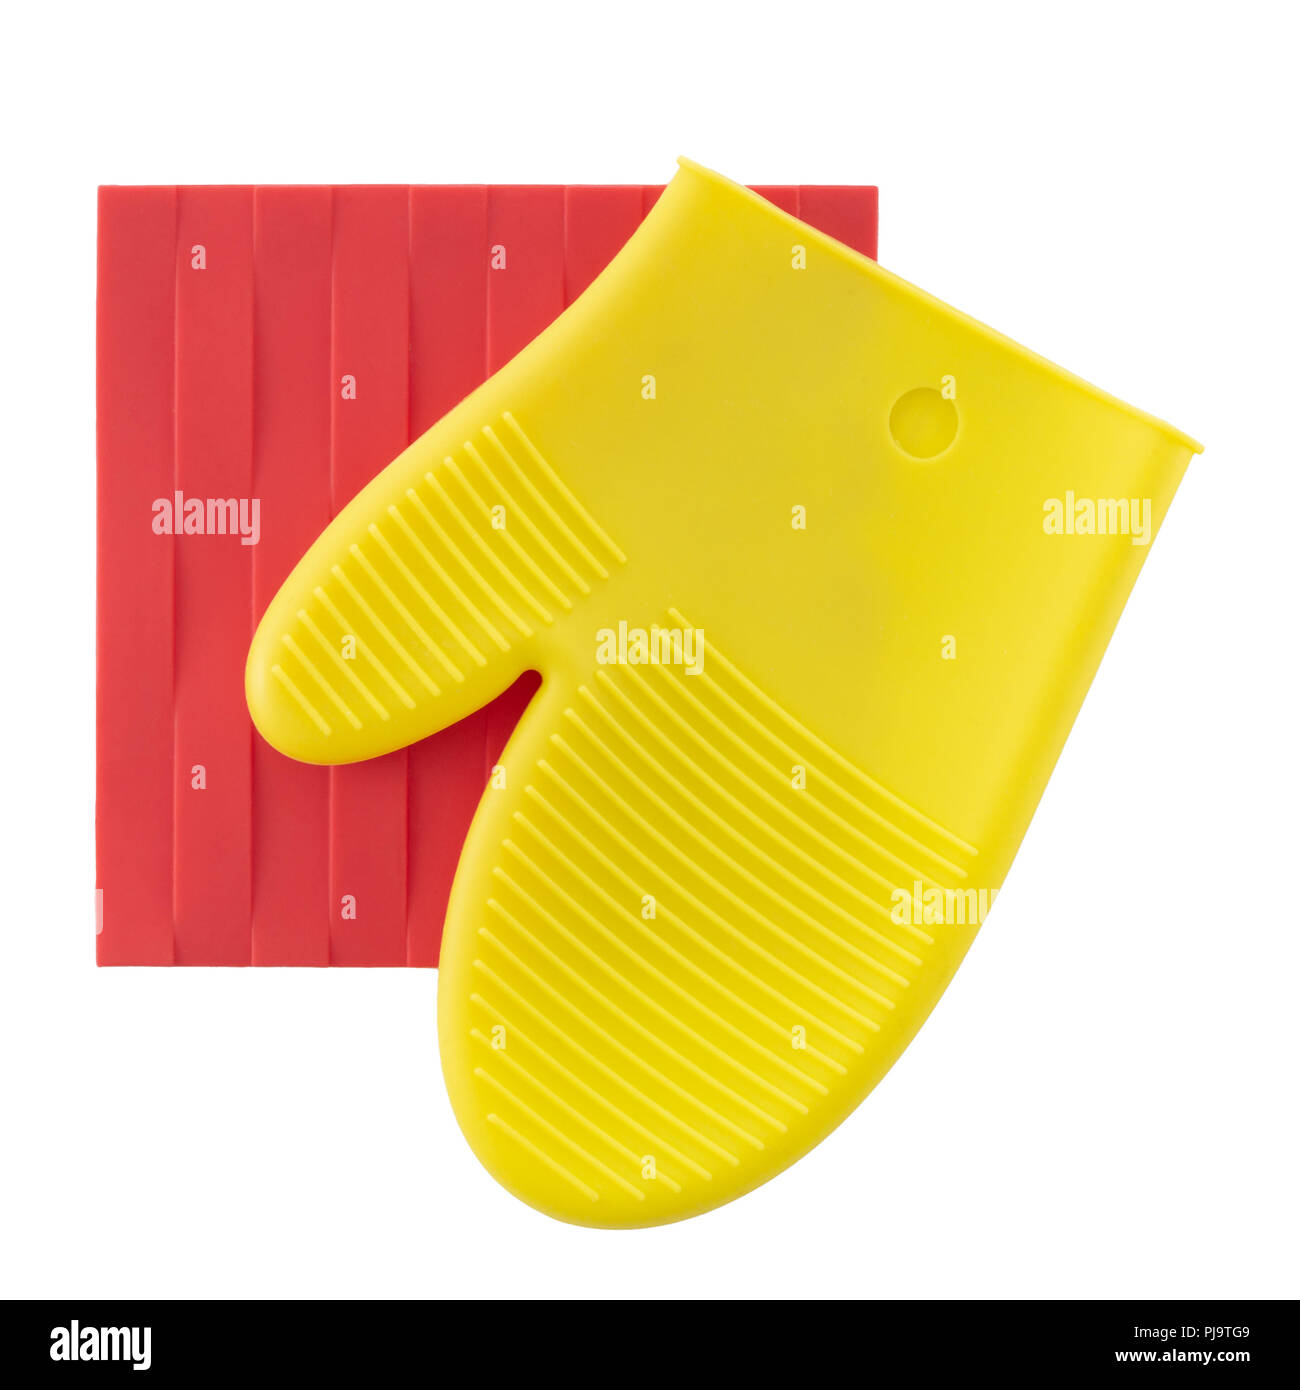 Silicon, silicone pot holders, red and yellow, isolated on white background. Modern kitchenware, square and mitt glove shape. Stock Photo